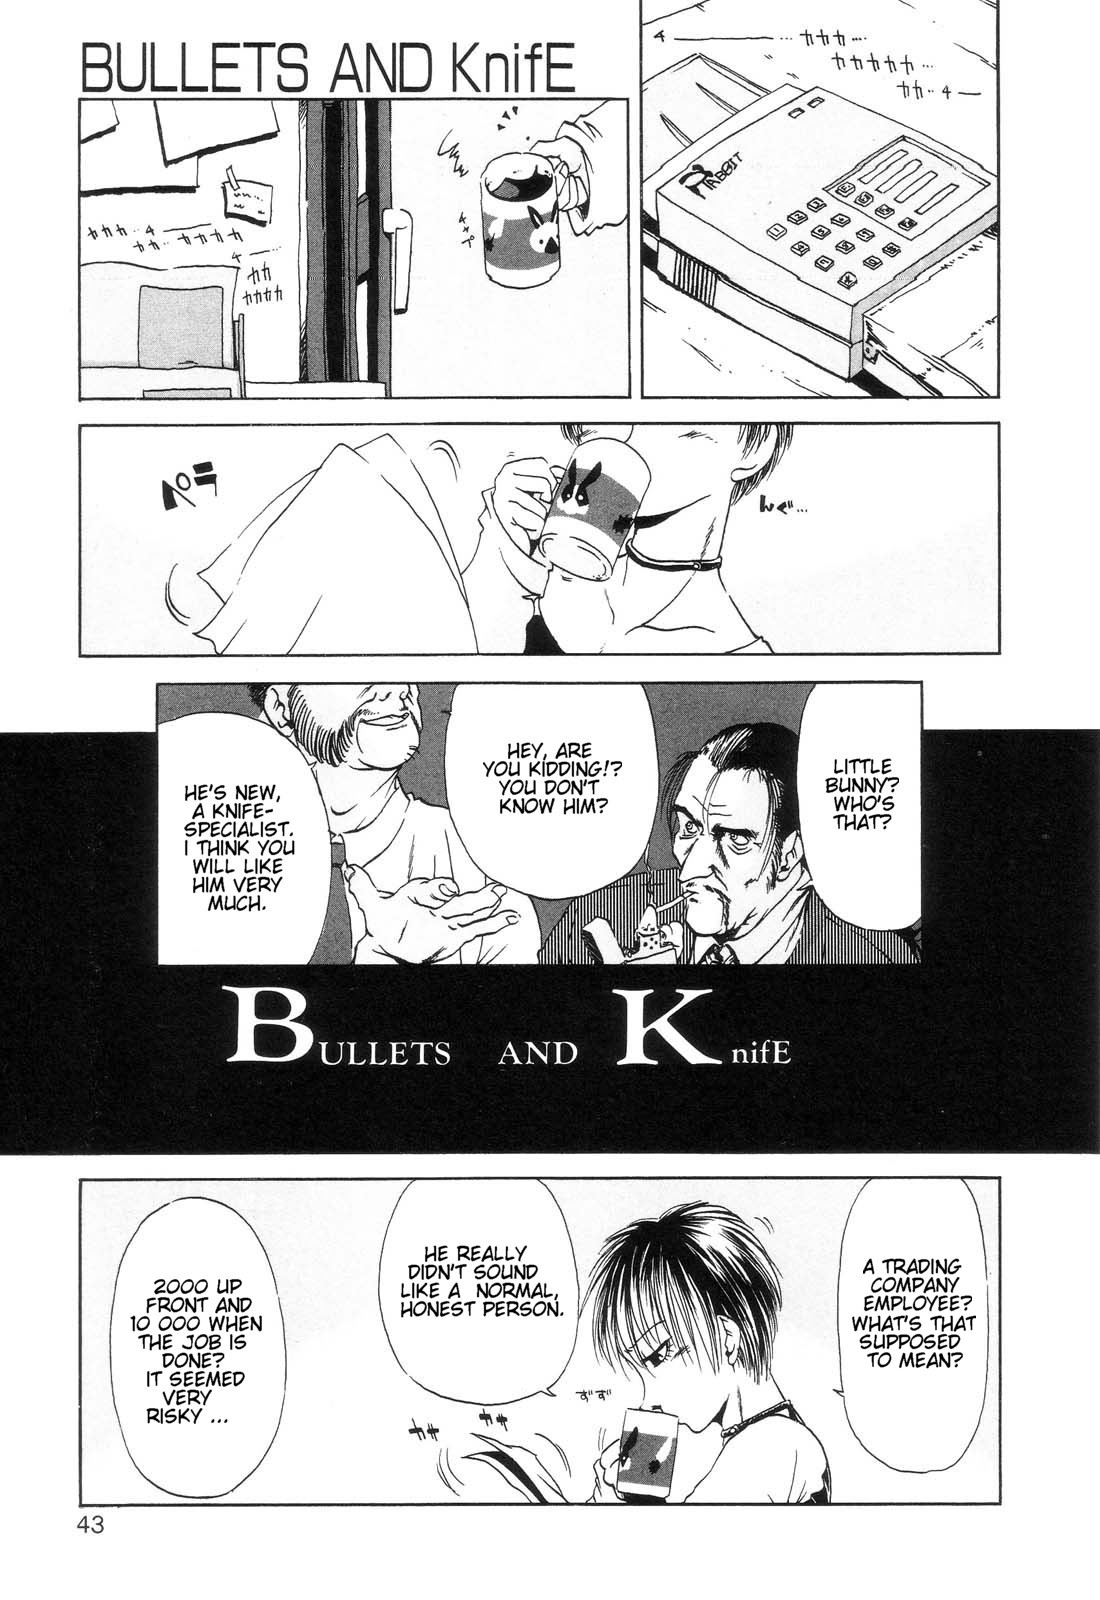 Akiba Oze - Bullets and Knife page 1 full